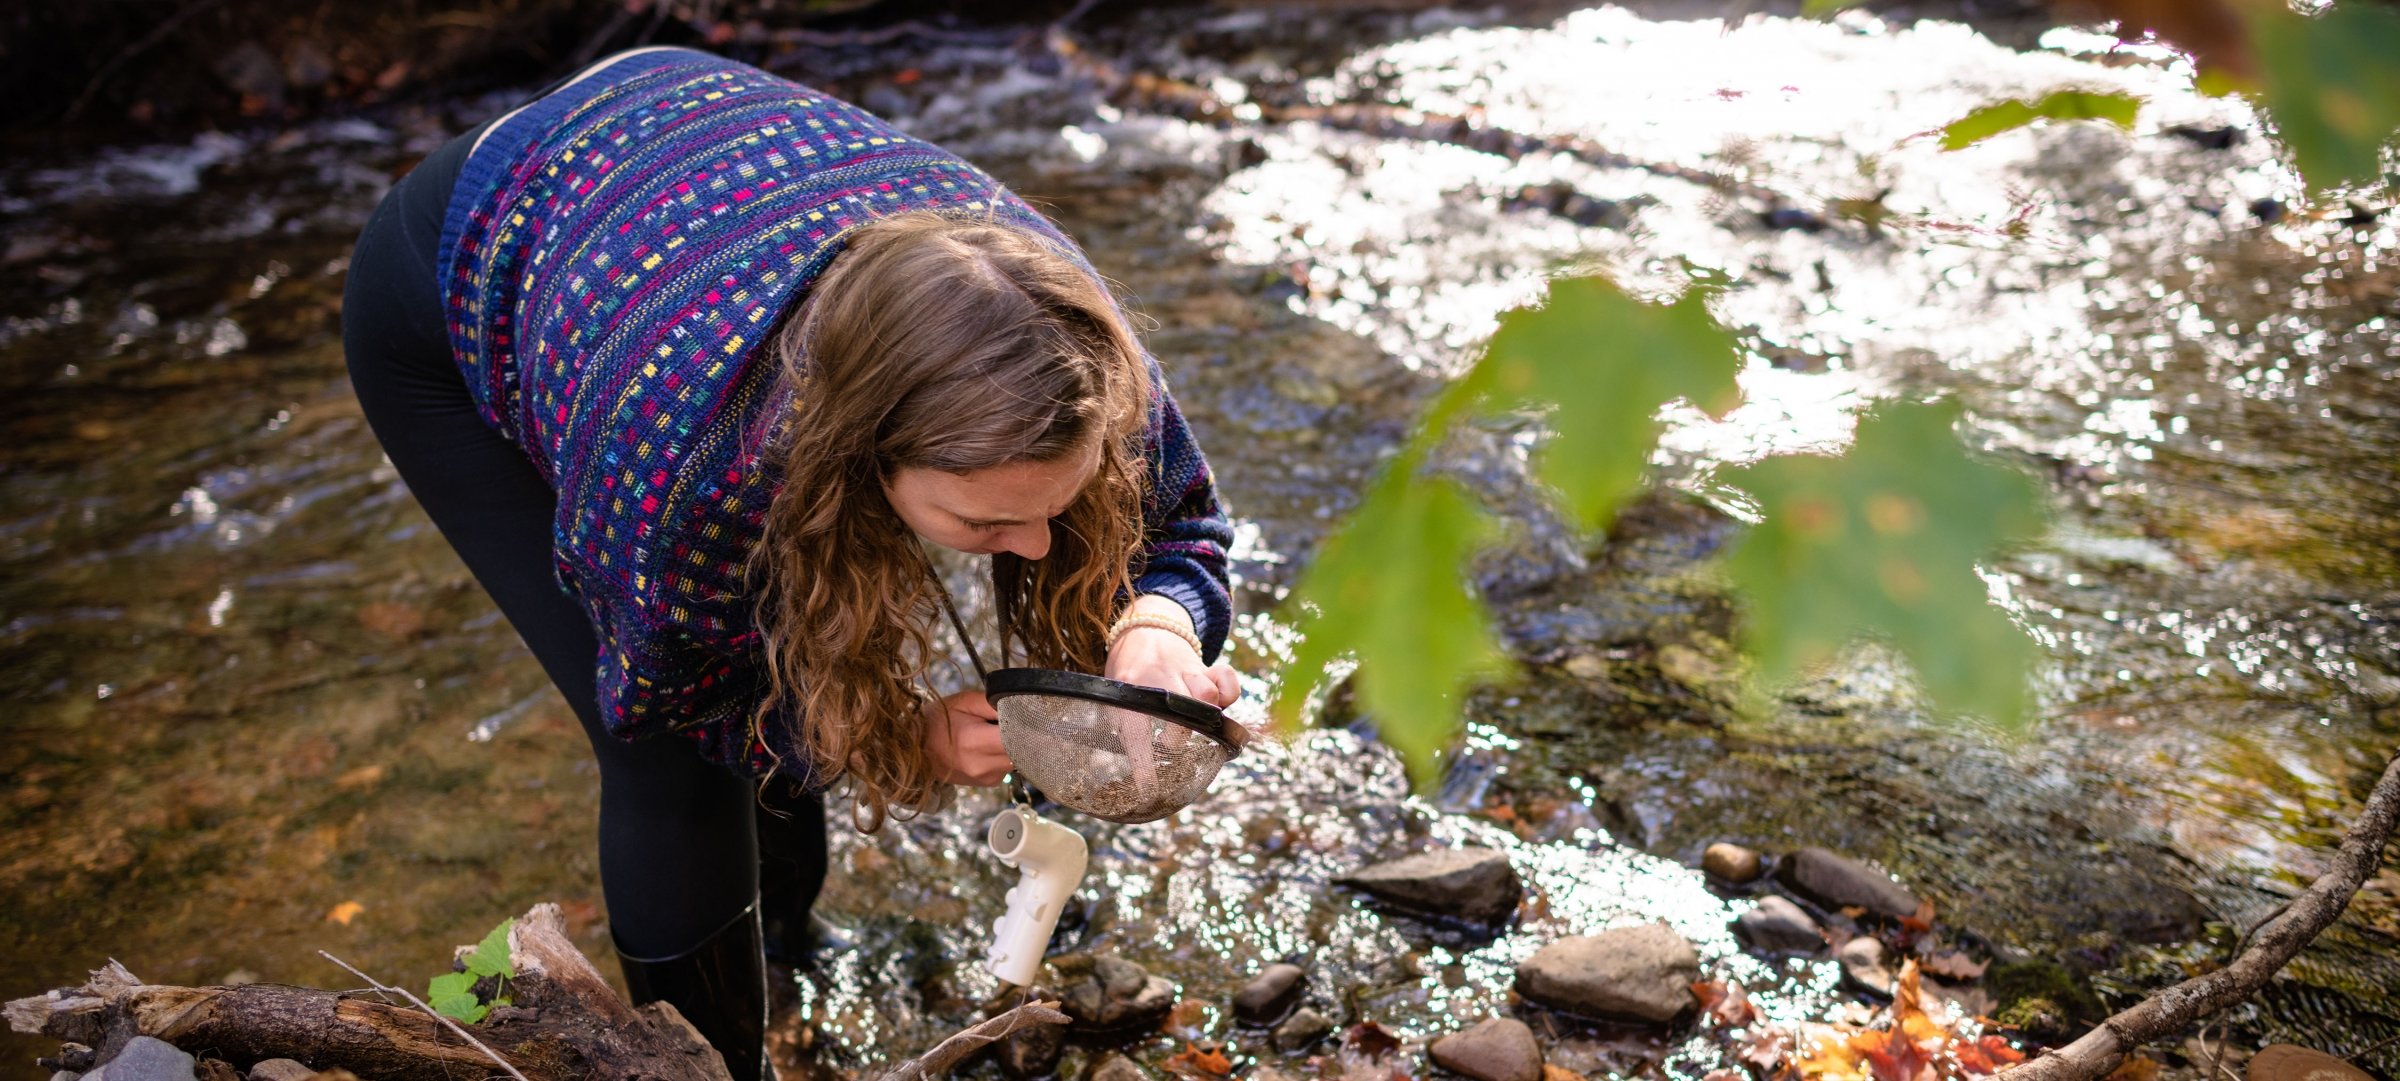 Student, standing in a stream, sifts through material collected in a mesh strainer